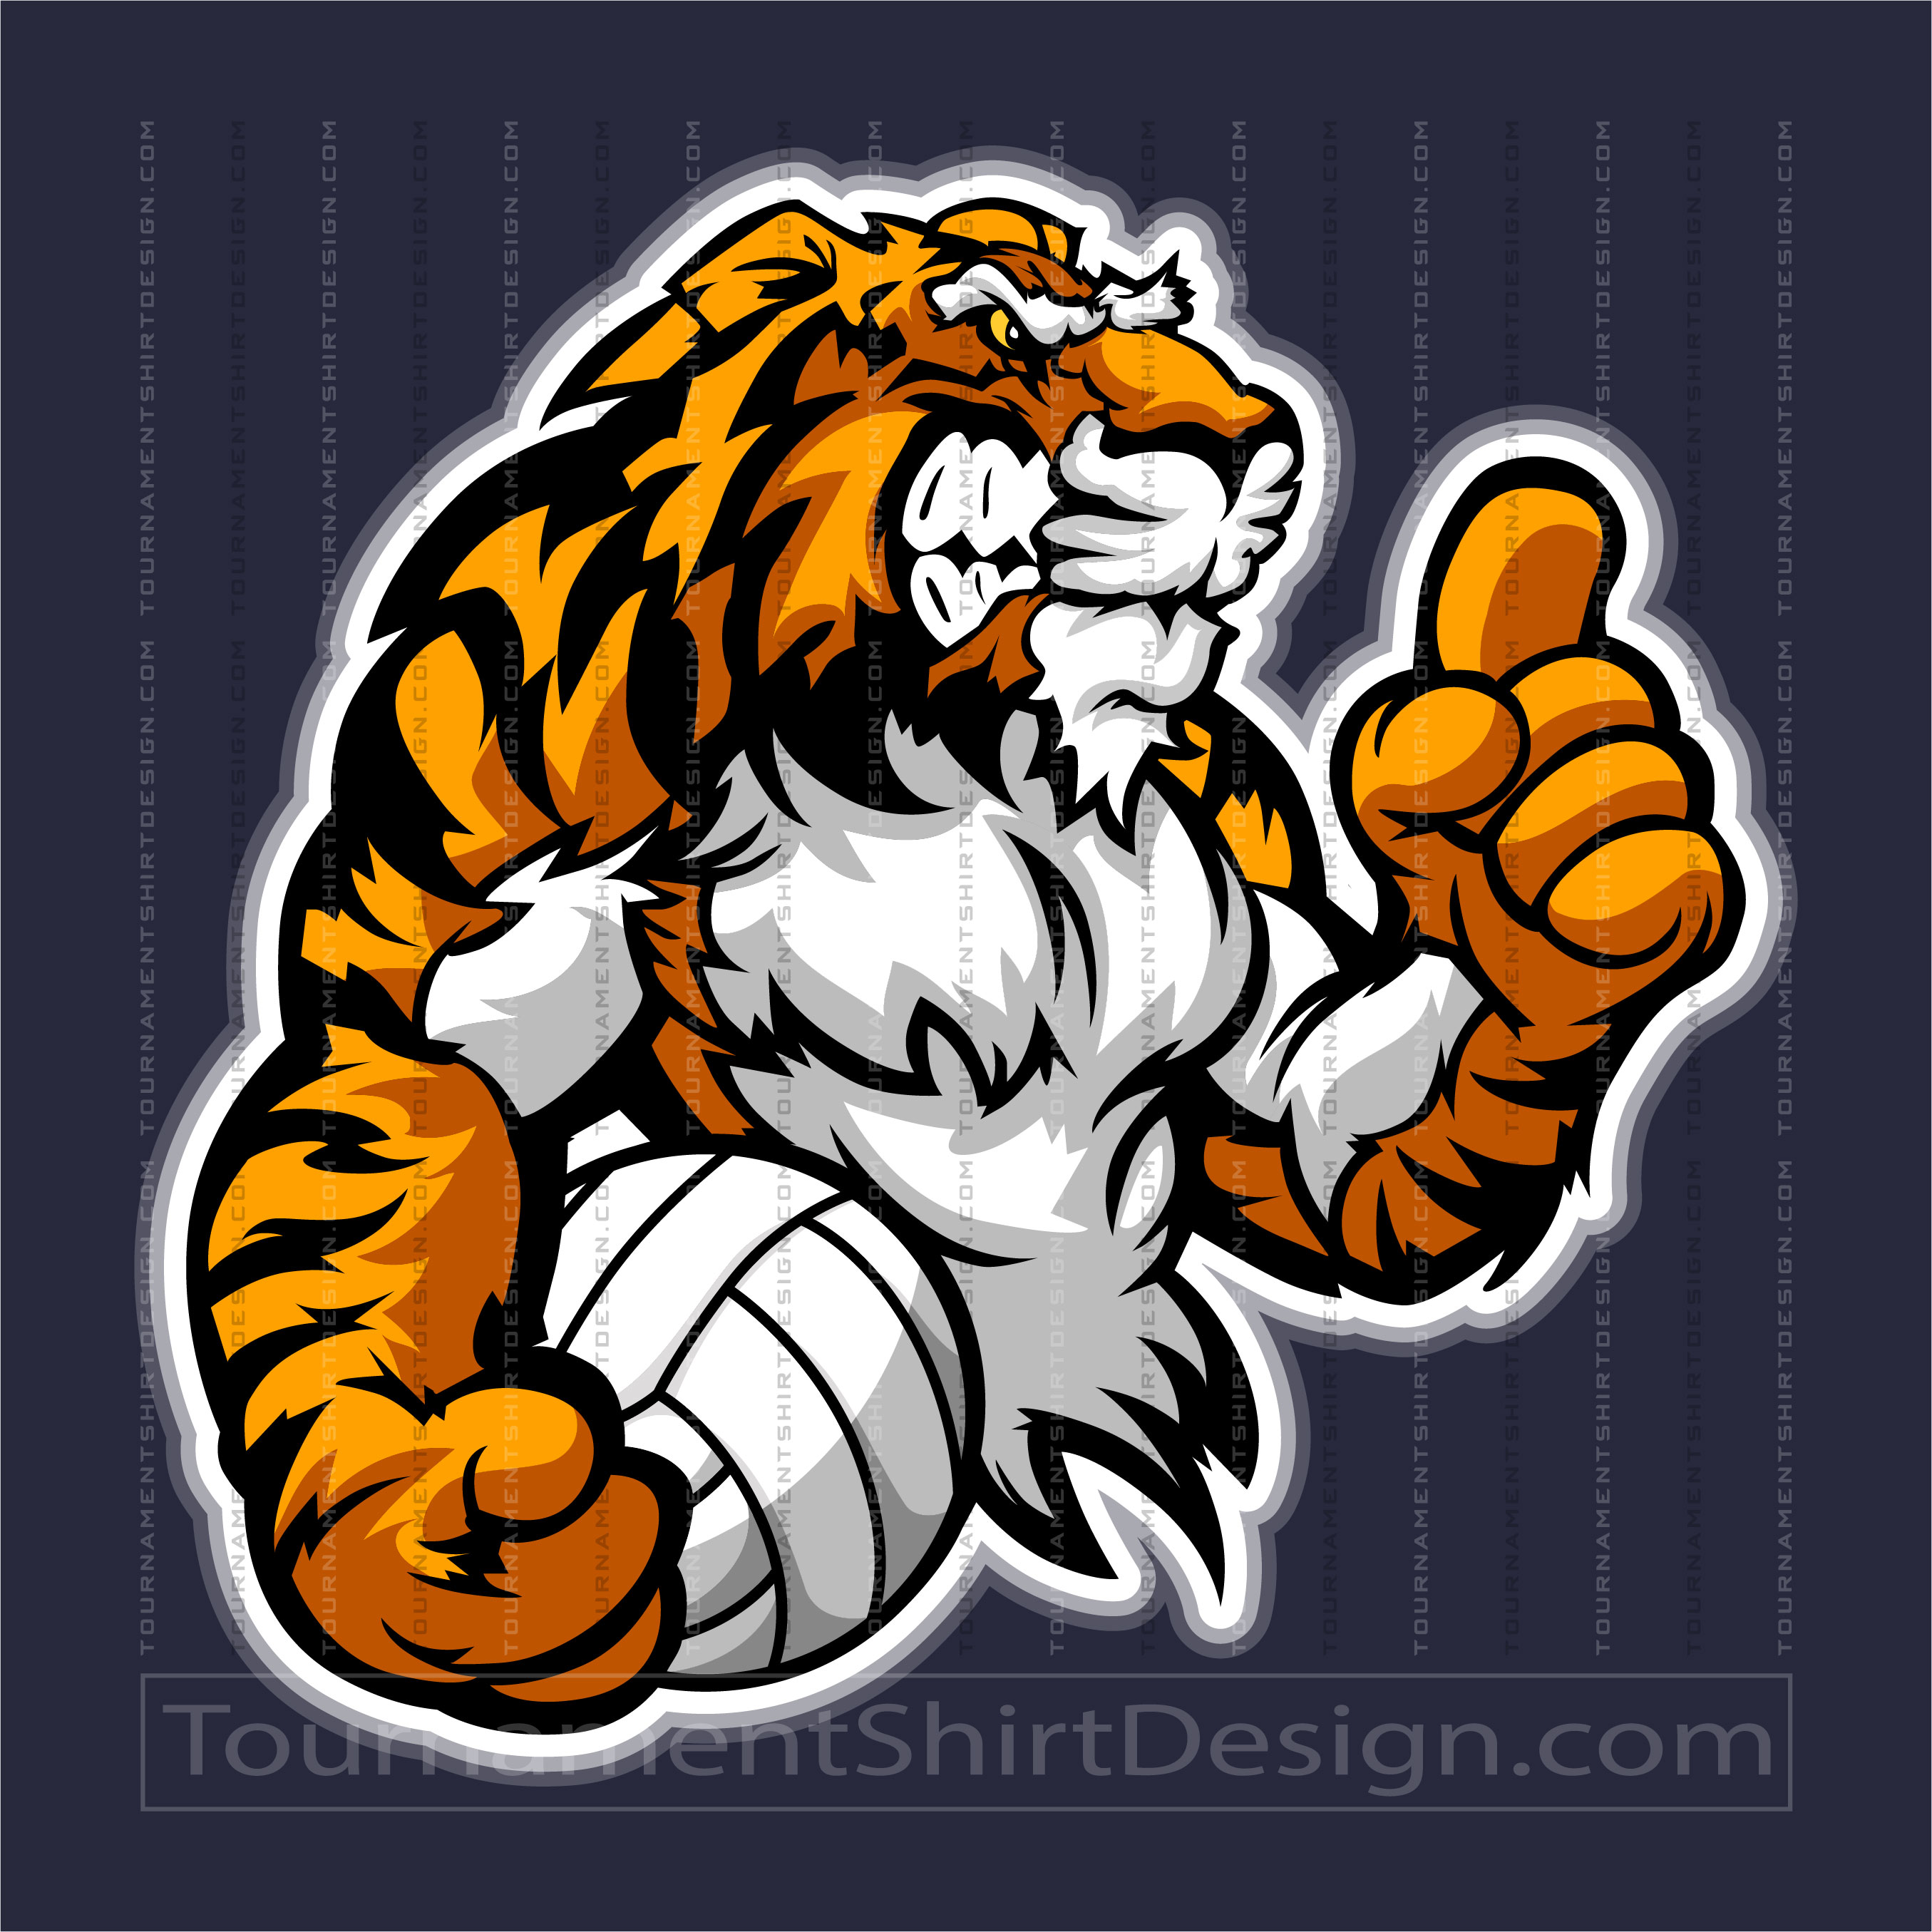 Volleyball Tigers Image